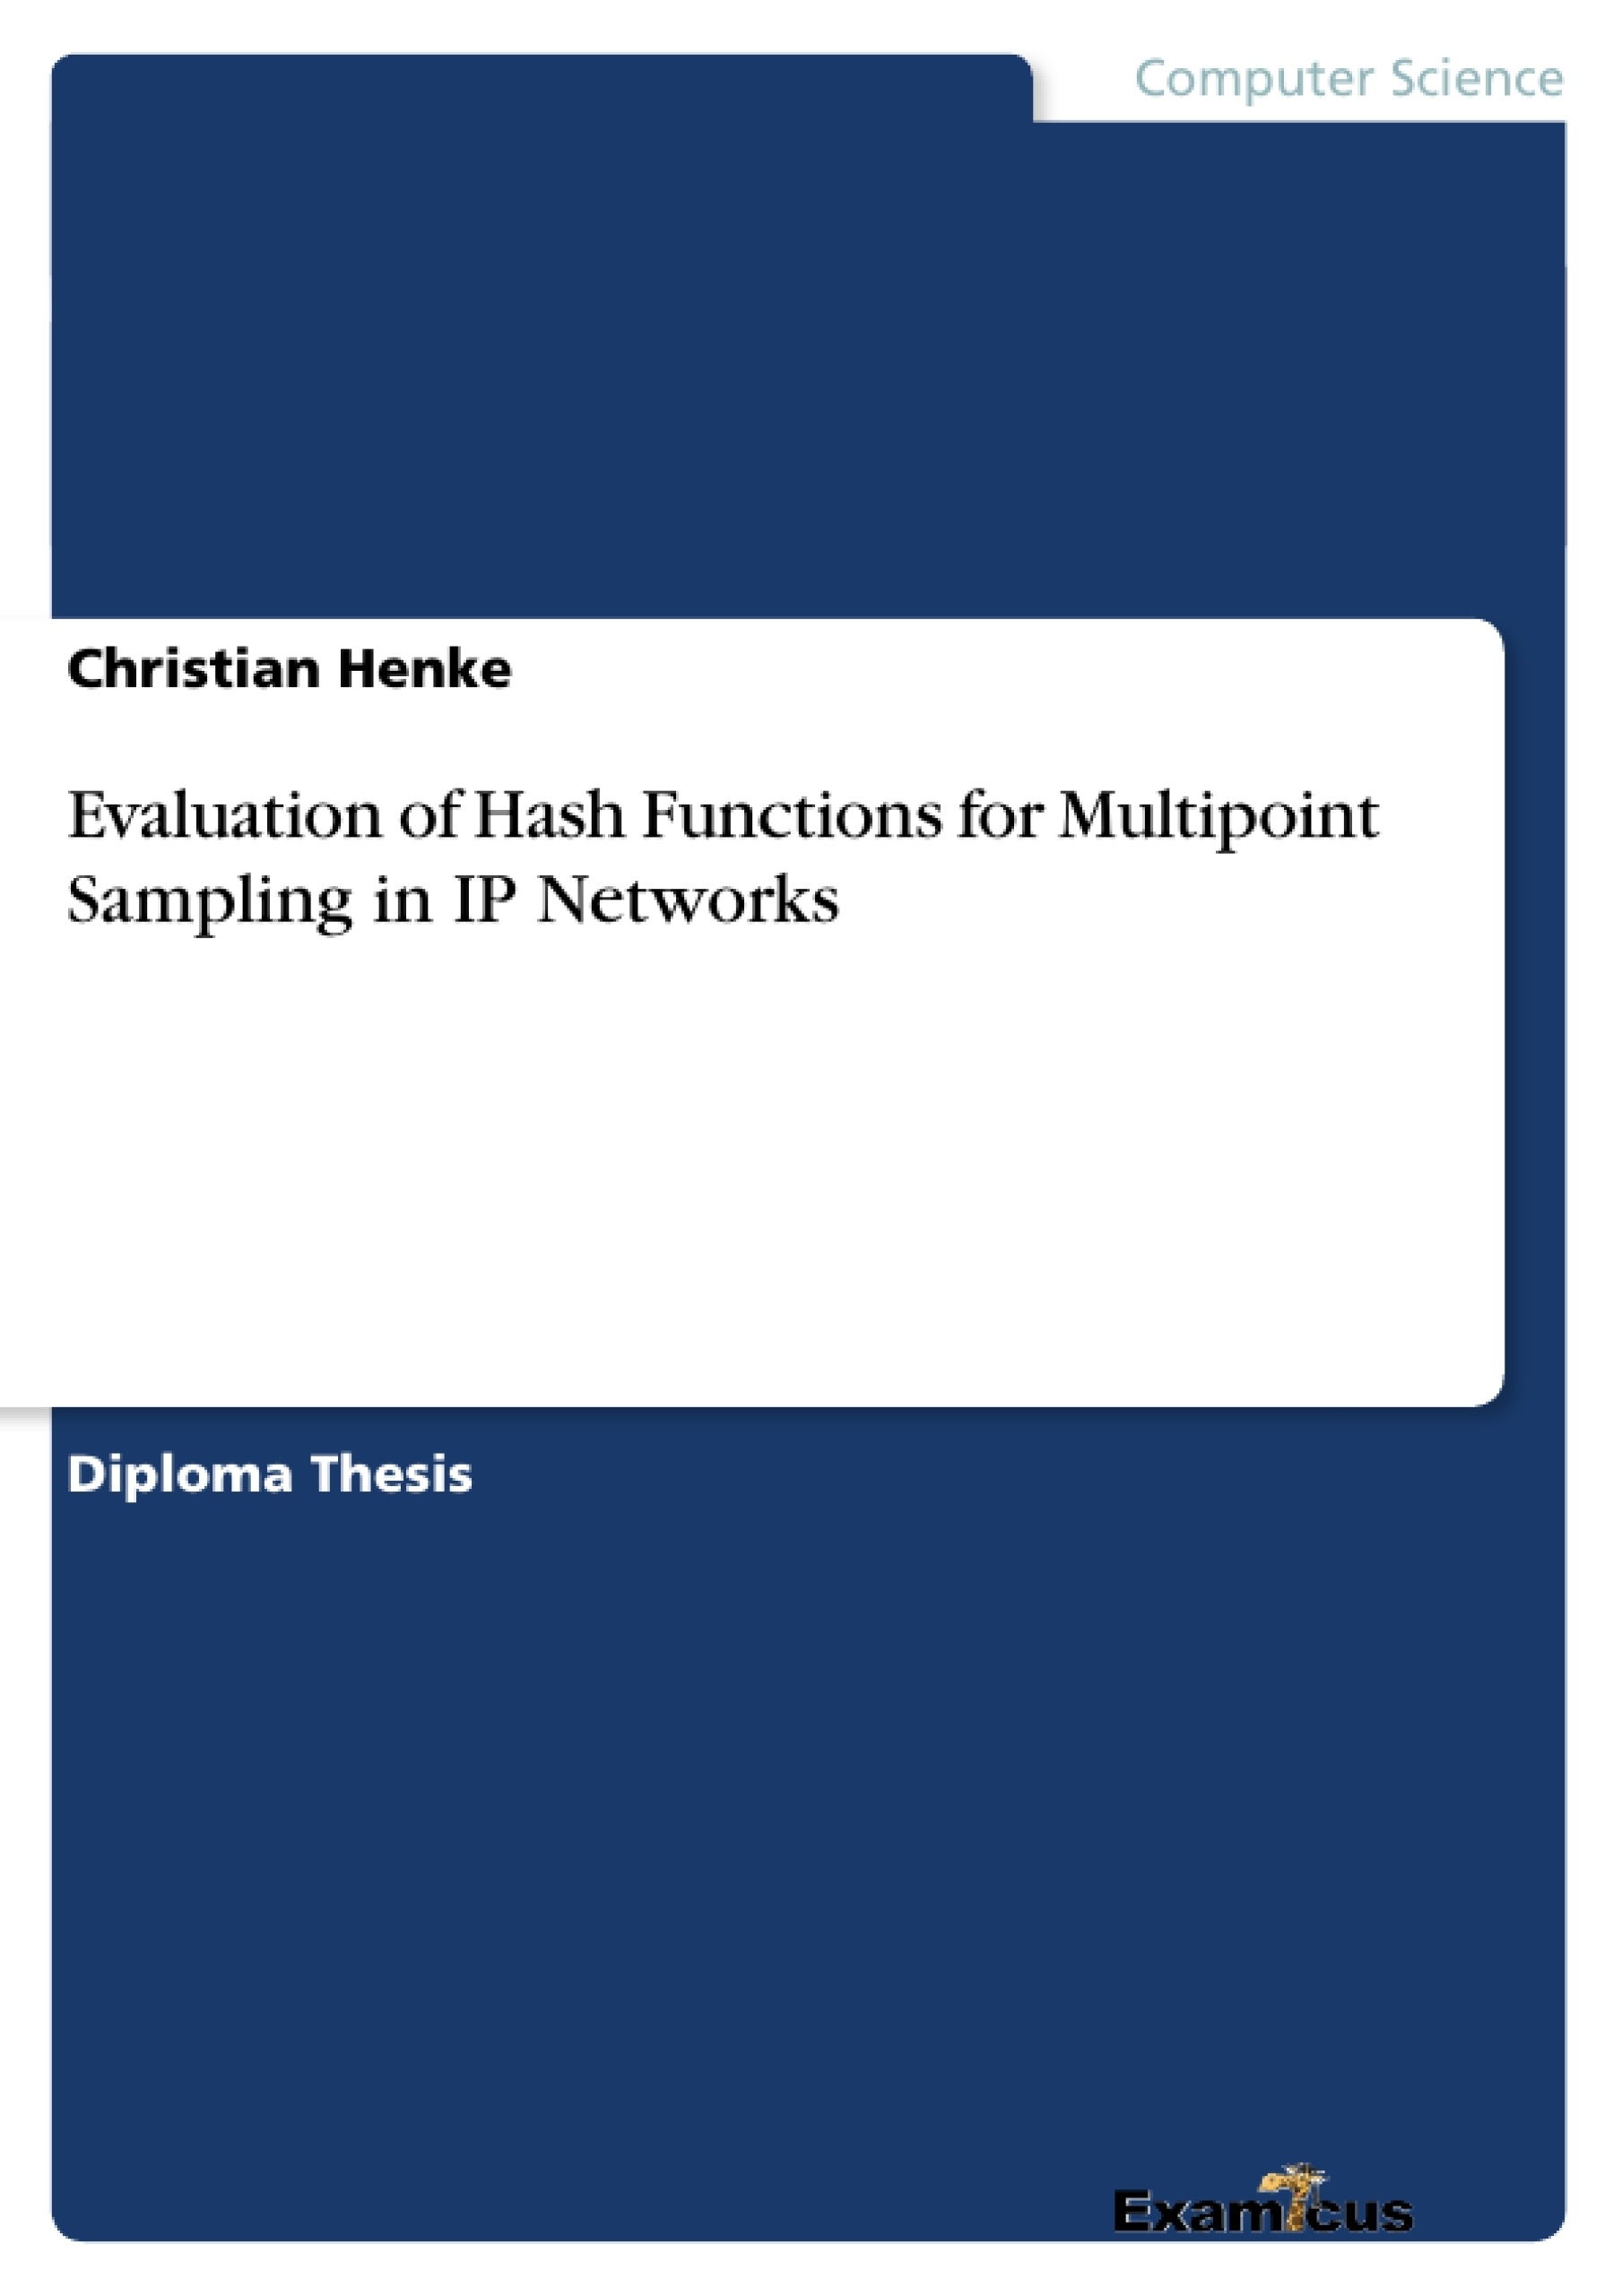 Title: Evaluation of Hash Functions for Multipoint Sampling in IP Networks